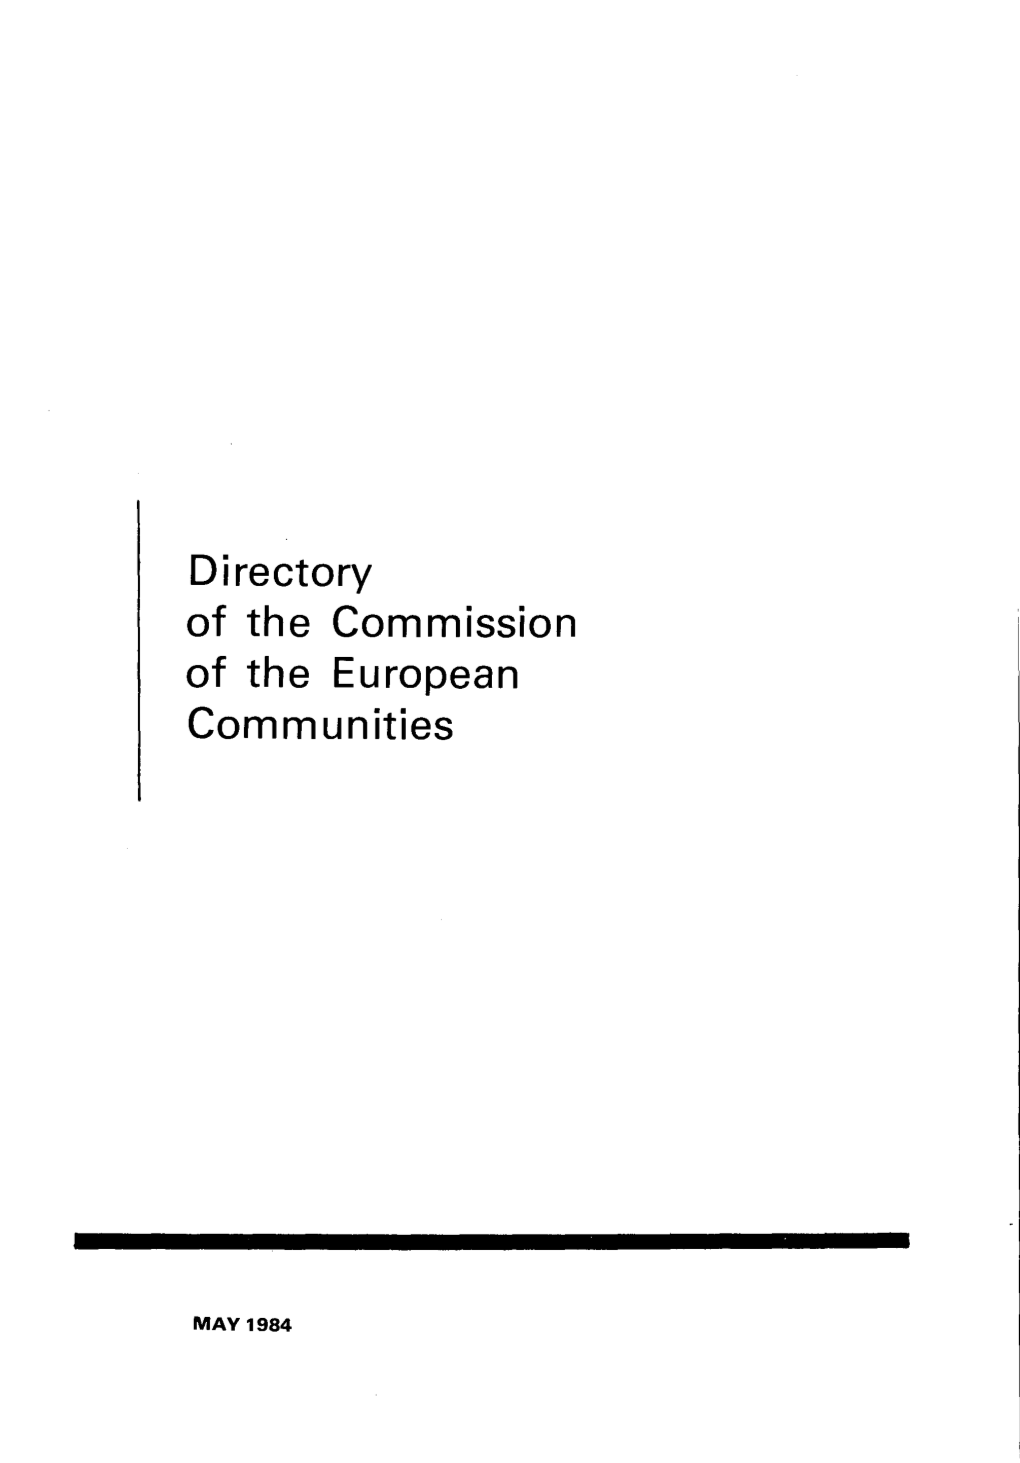 Directory of the Commission of the European Communities